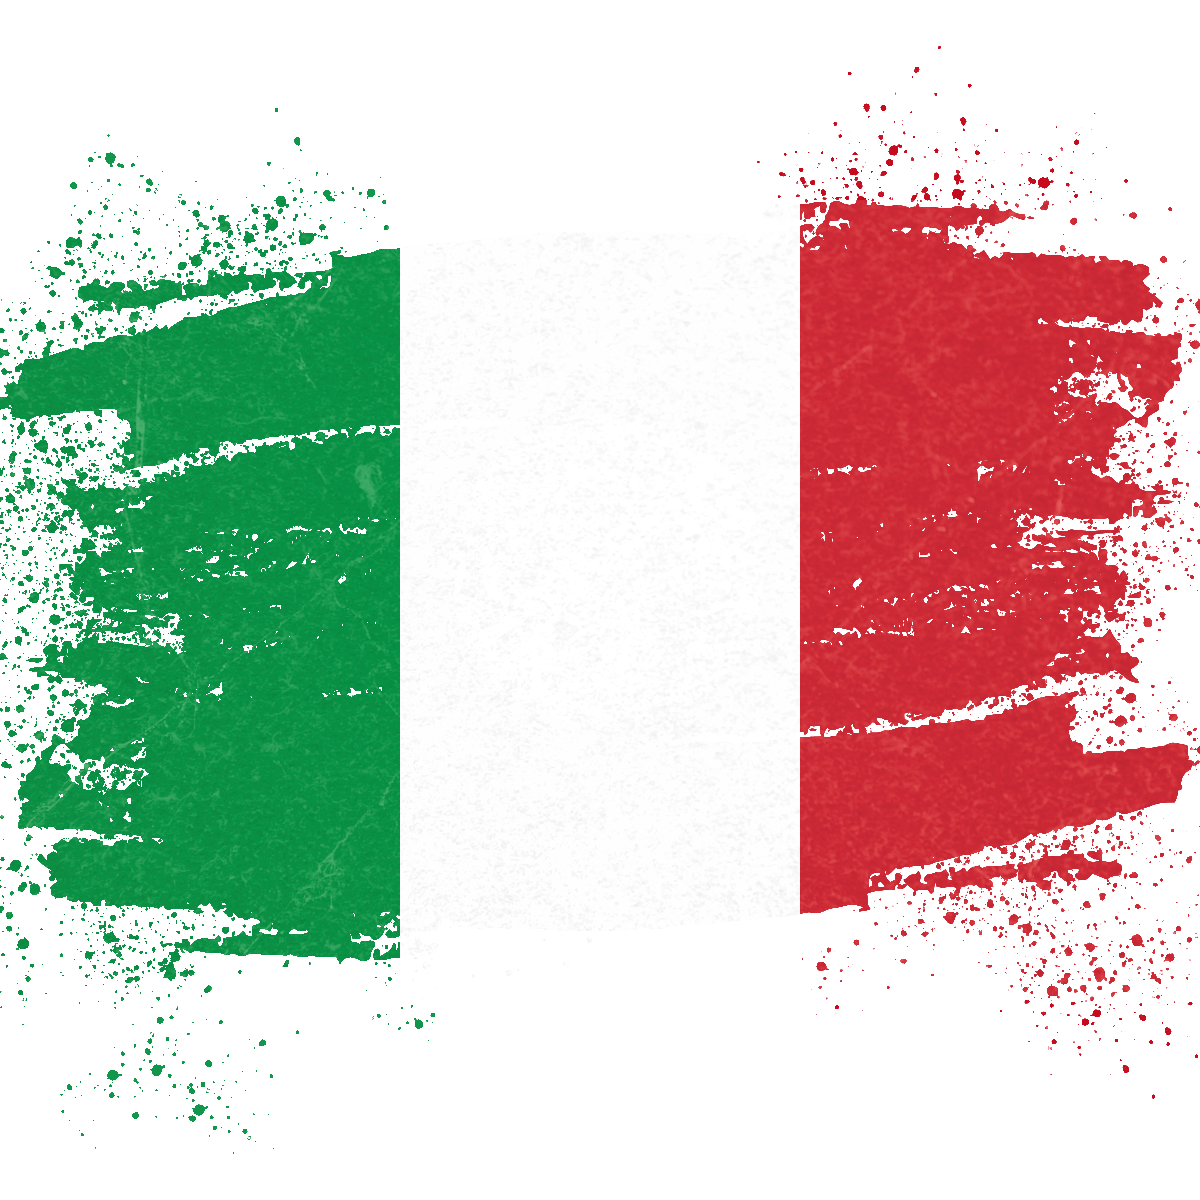 —Pngtree—vintage italy flag in brush_6075337